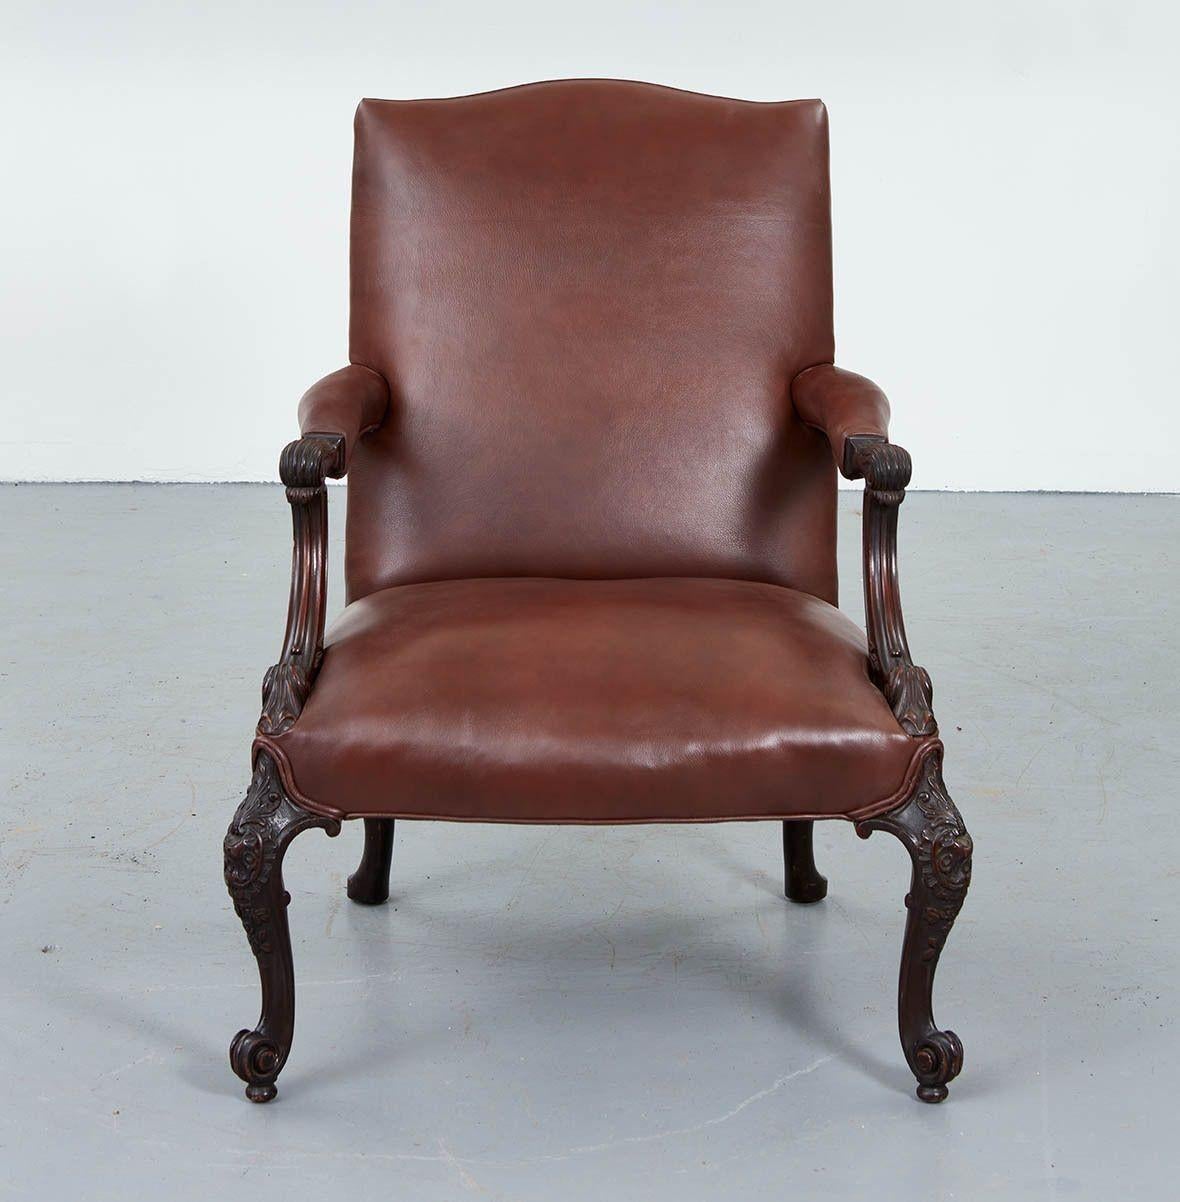 Fine Georgian style carved mahogany Gainsborough armchair of generous scale, the shaped back over padded arms with acanthus leaf scroll carving over upholstered seat, the well carved legs with acanthus leave carved knees and scrolled feet, the whole